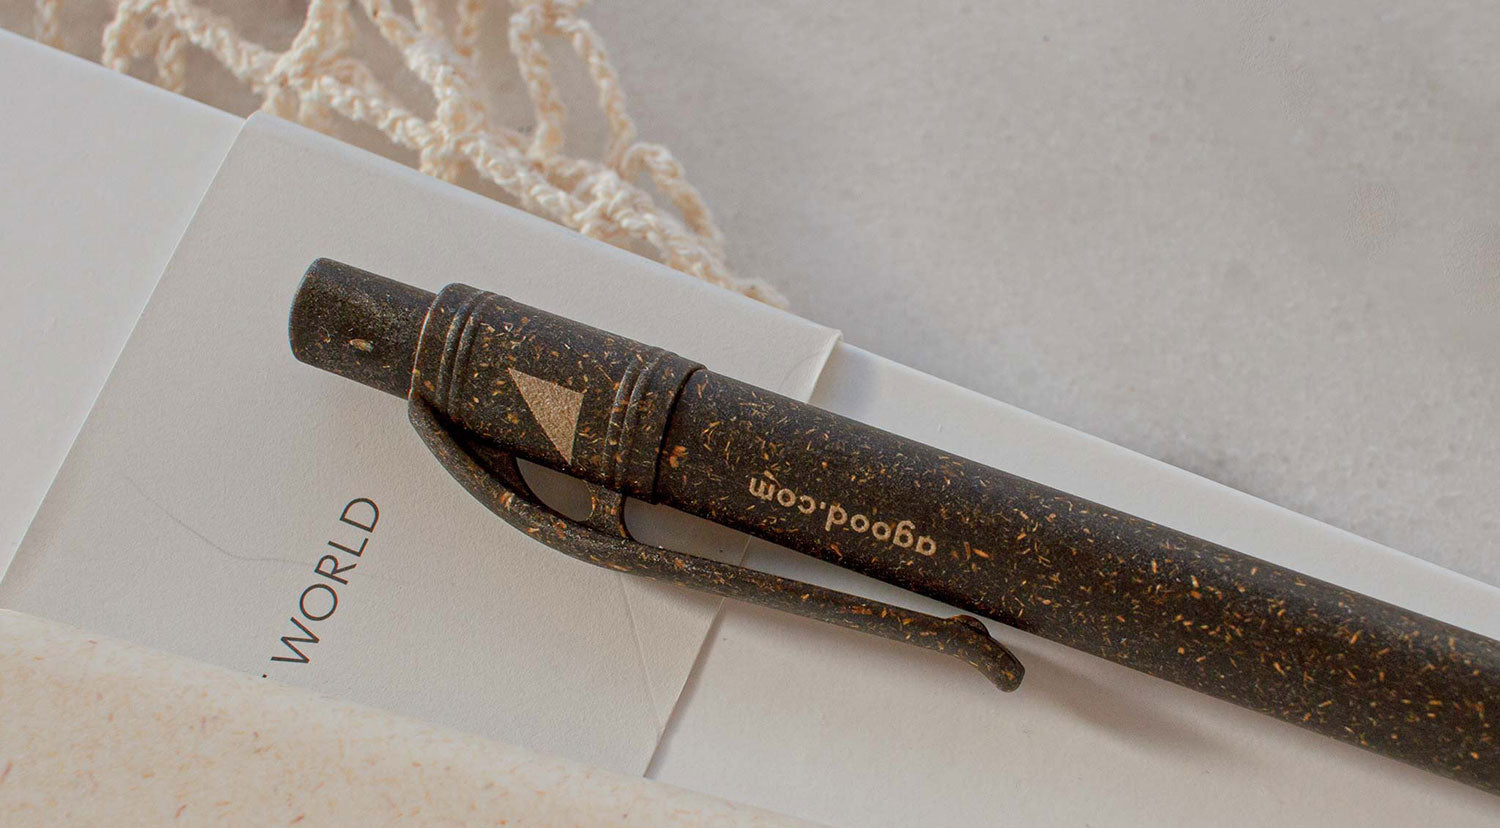 Agood Company Pen from Meadow Grass on the Stone Paper Notebook